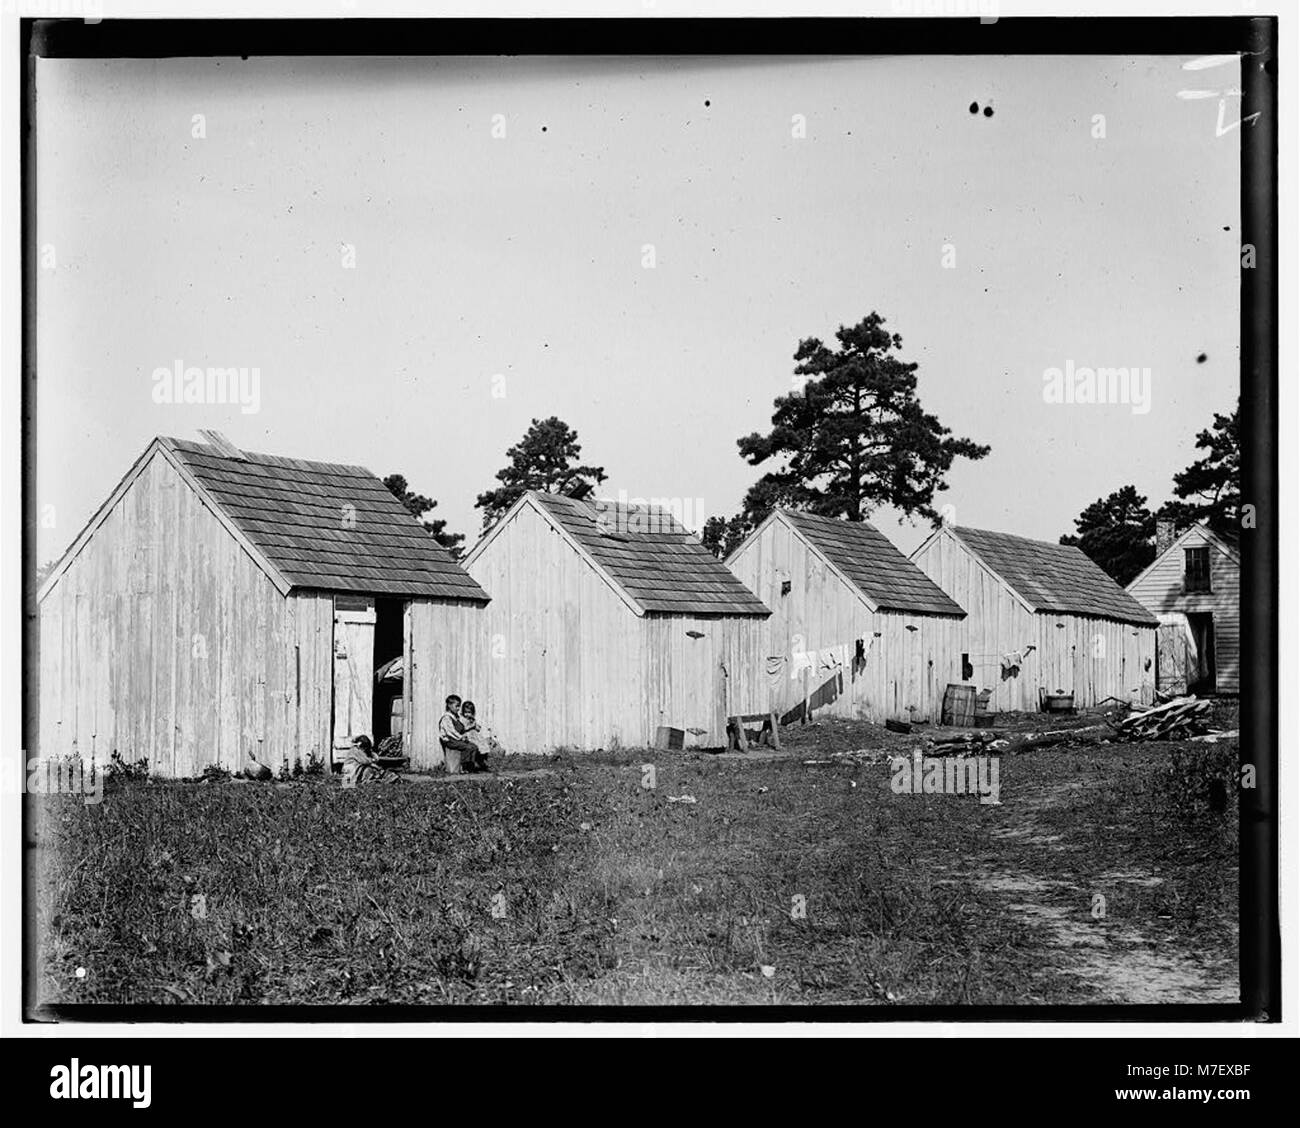 Small shack on Forsythe's Bog, occupied by De Marco family, 10 in the family living in this one room. Room is 10 ft. x 11 ft. x 5 1-2 ft. high and gable attic above. Wooden toilets near at LOC nclc.05310 Stock Photo